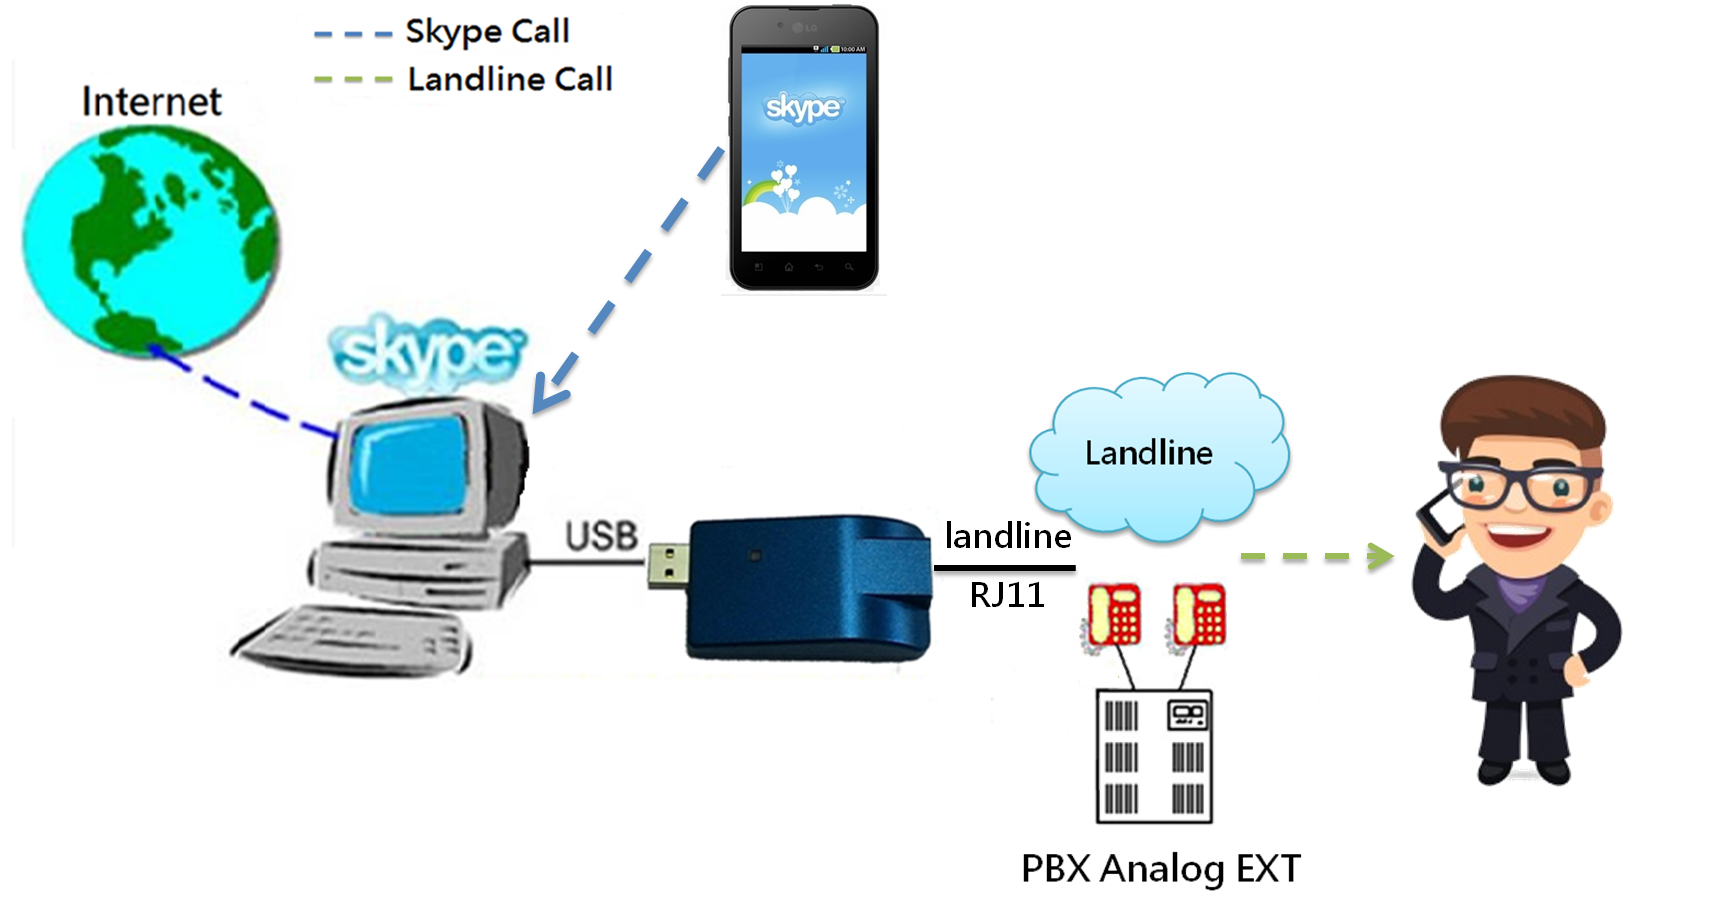 M-office incoming Skype calls for any landline calls